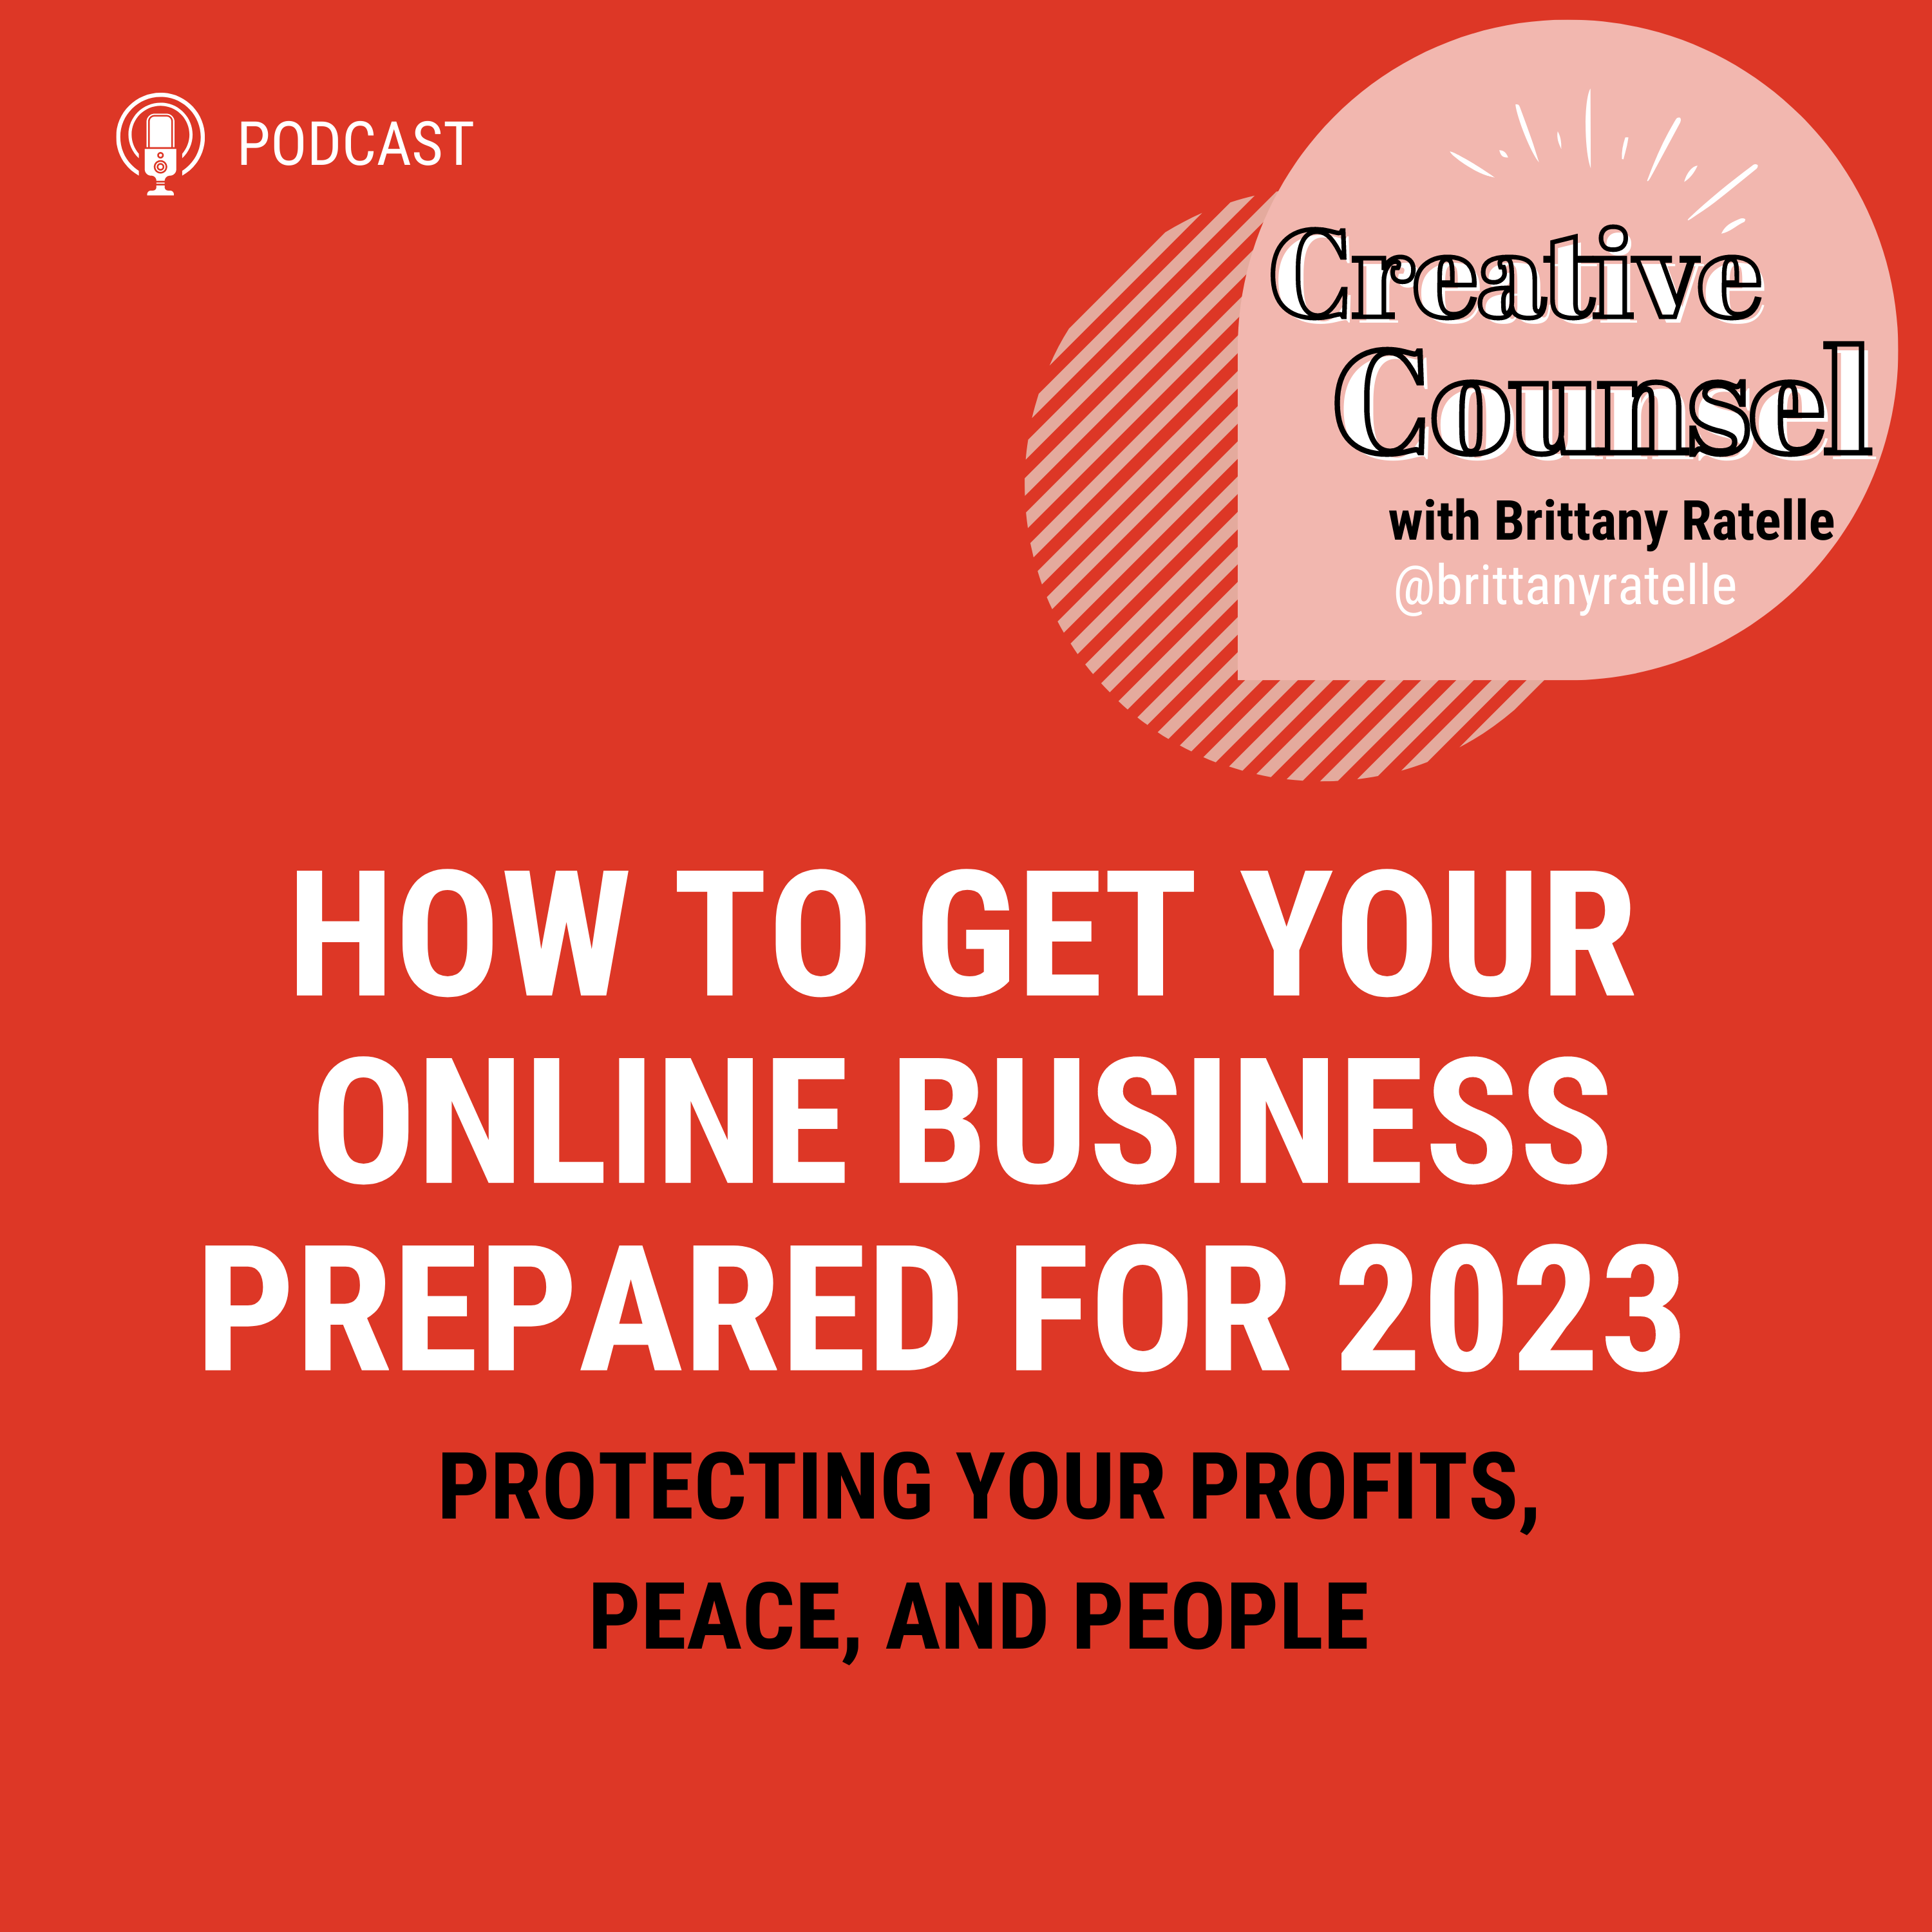 How to get your online business prepared for 2023 | Creative Counsel Podcast with Attorney Brittany Ratelle